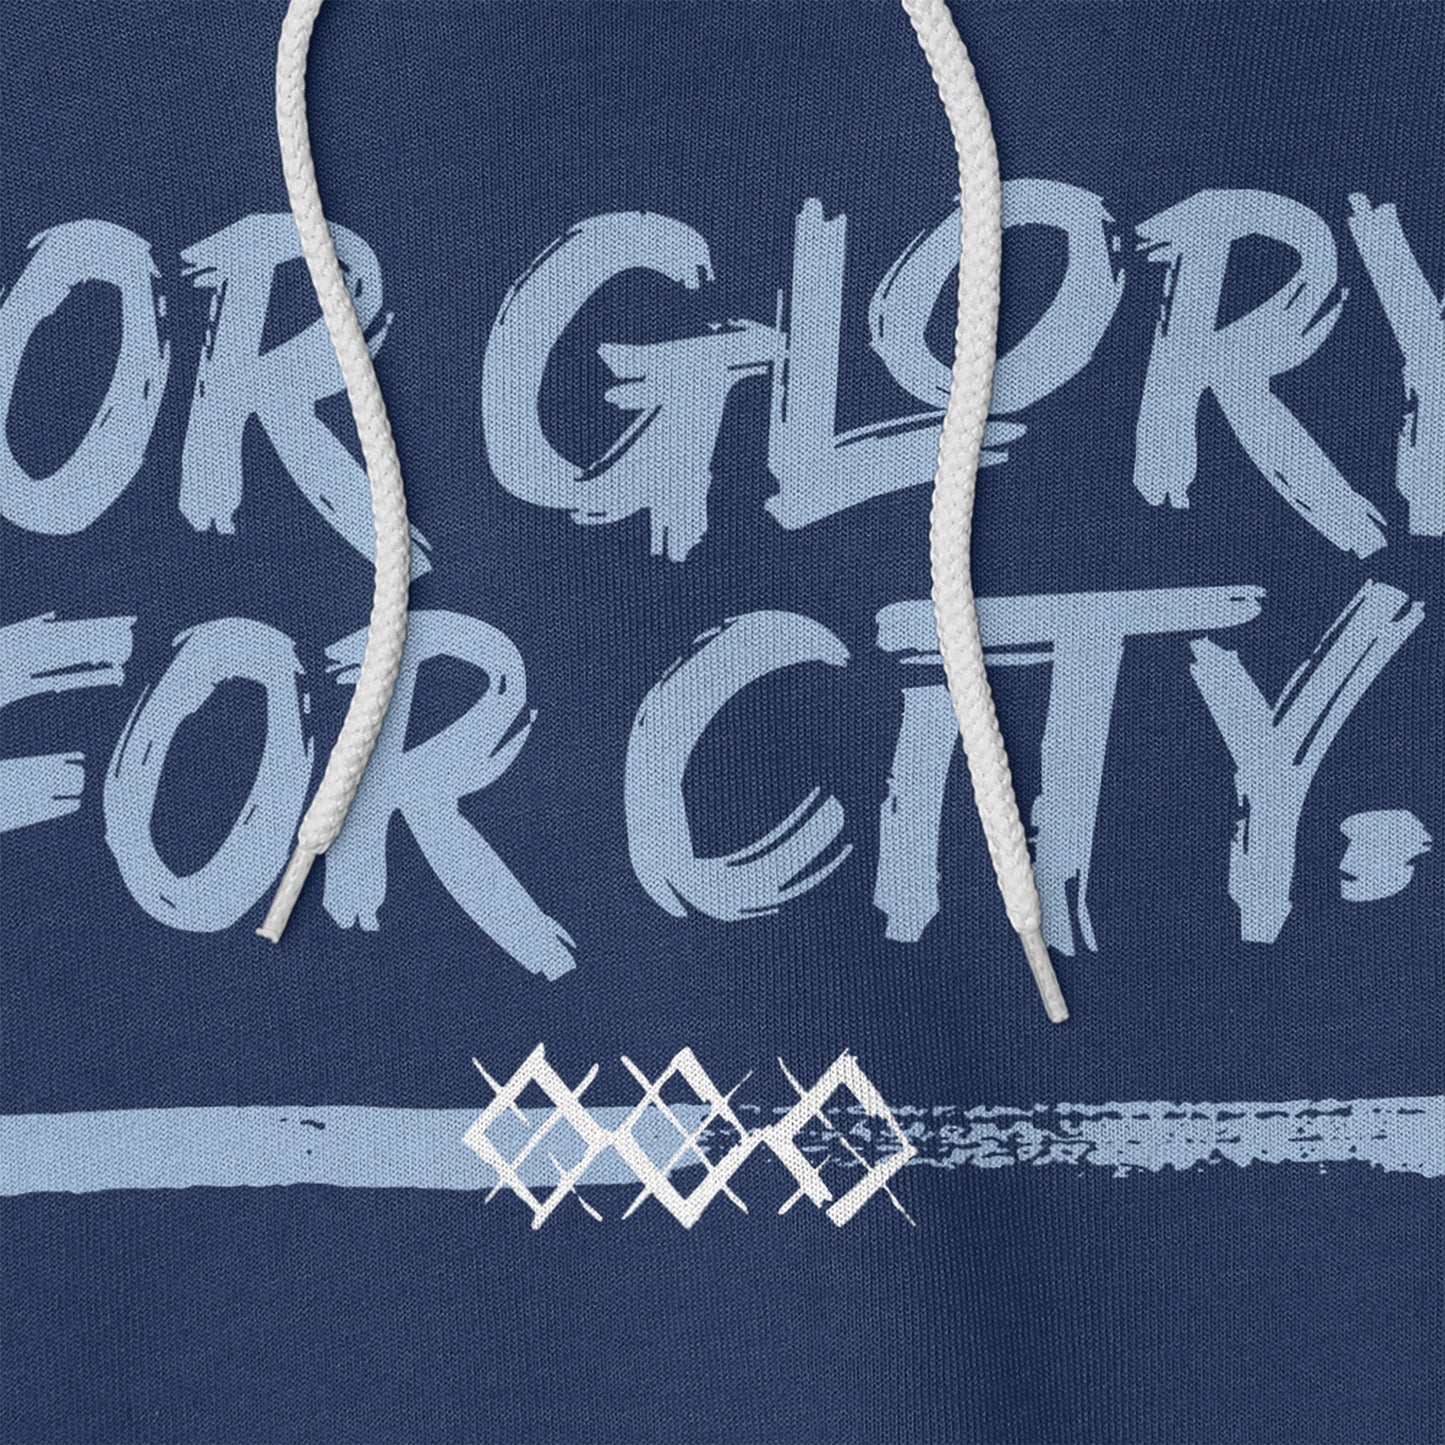 KC Swag Sporting Kansas City navy, powder, white FOR GLORY FOR CITY on navy pullover fleece hoodie closeup details of printed graphics